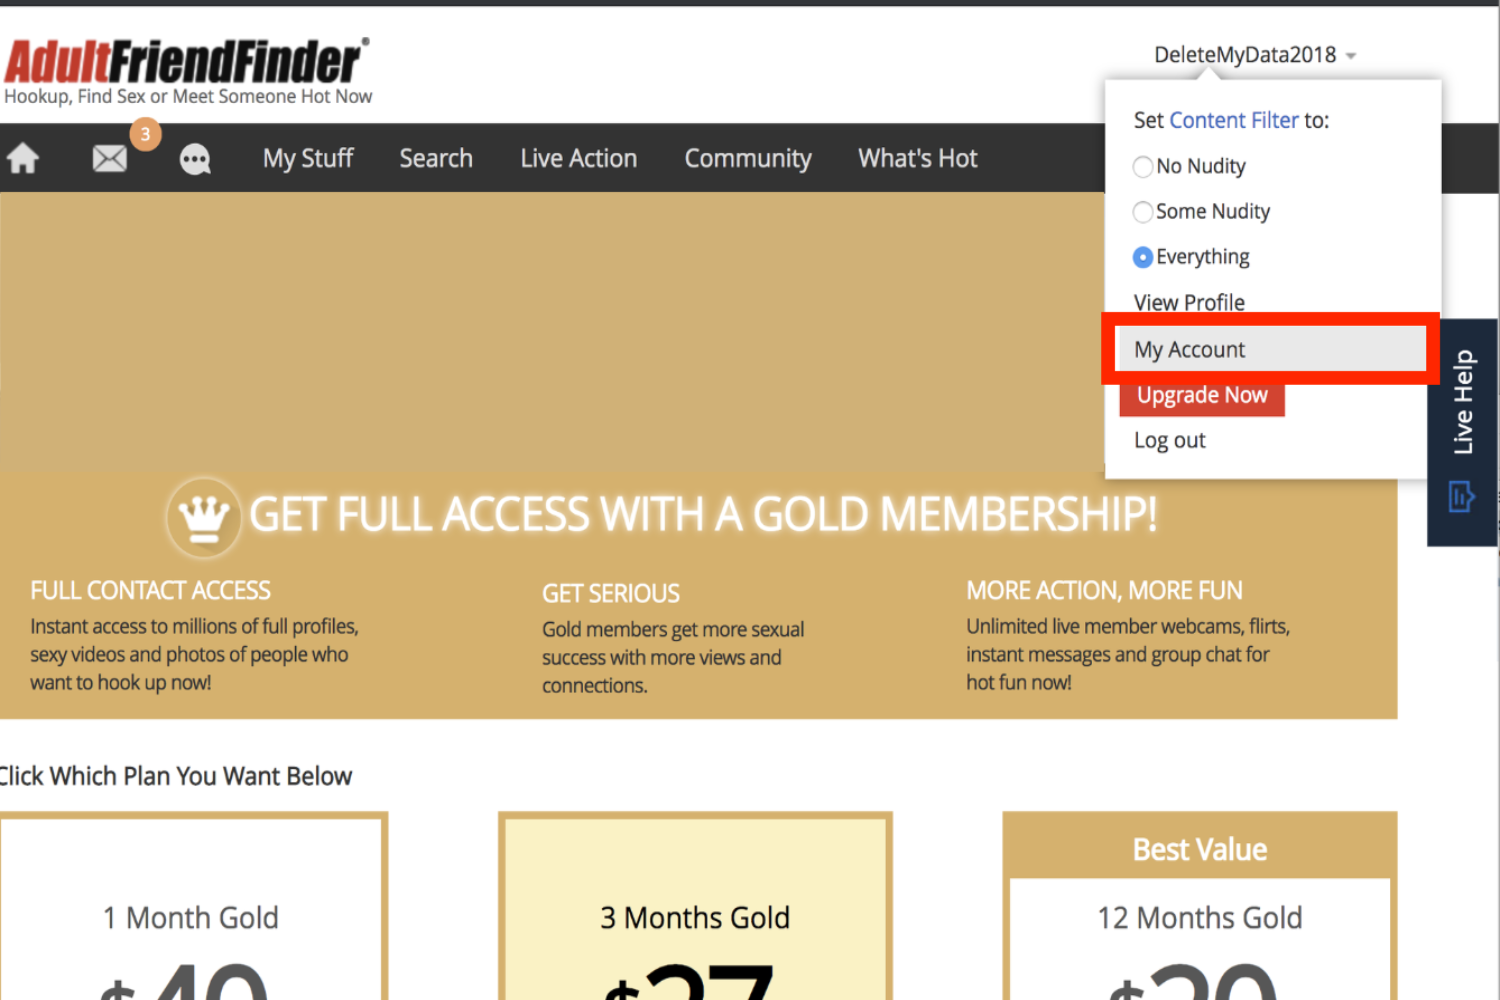 How To Turn Off AdultFriendFinder Auto Renewal